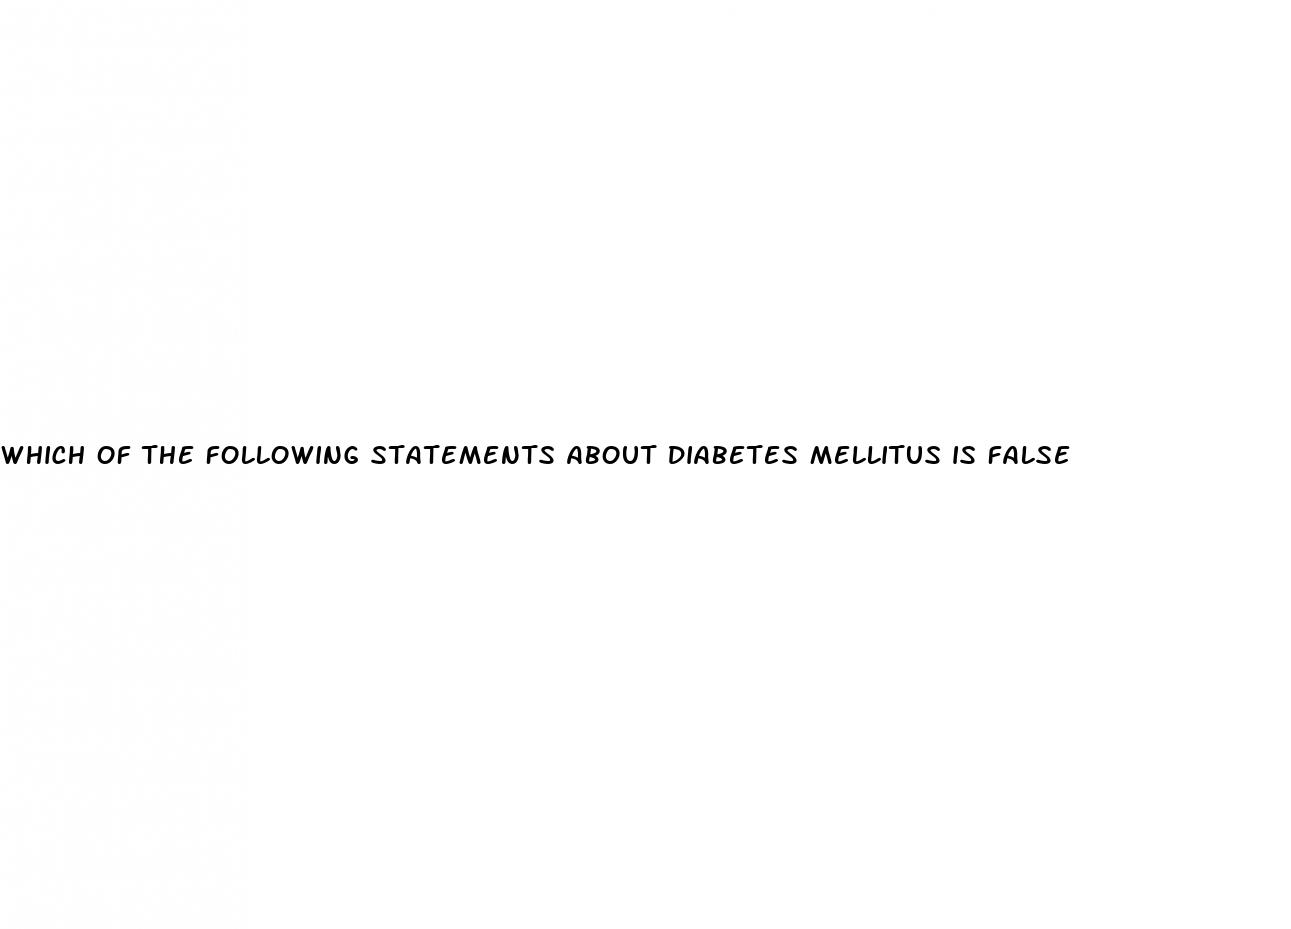 which of the following statements about diabetes mellitus is false